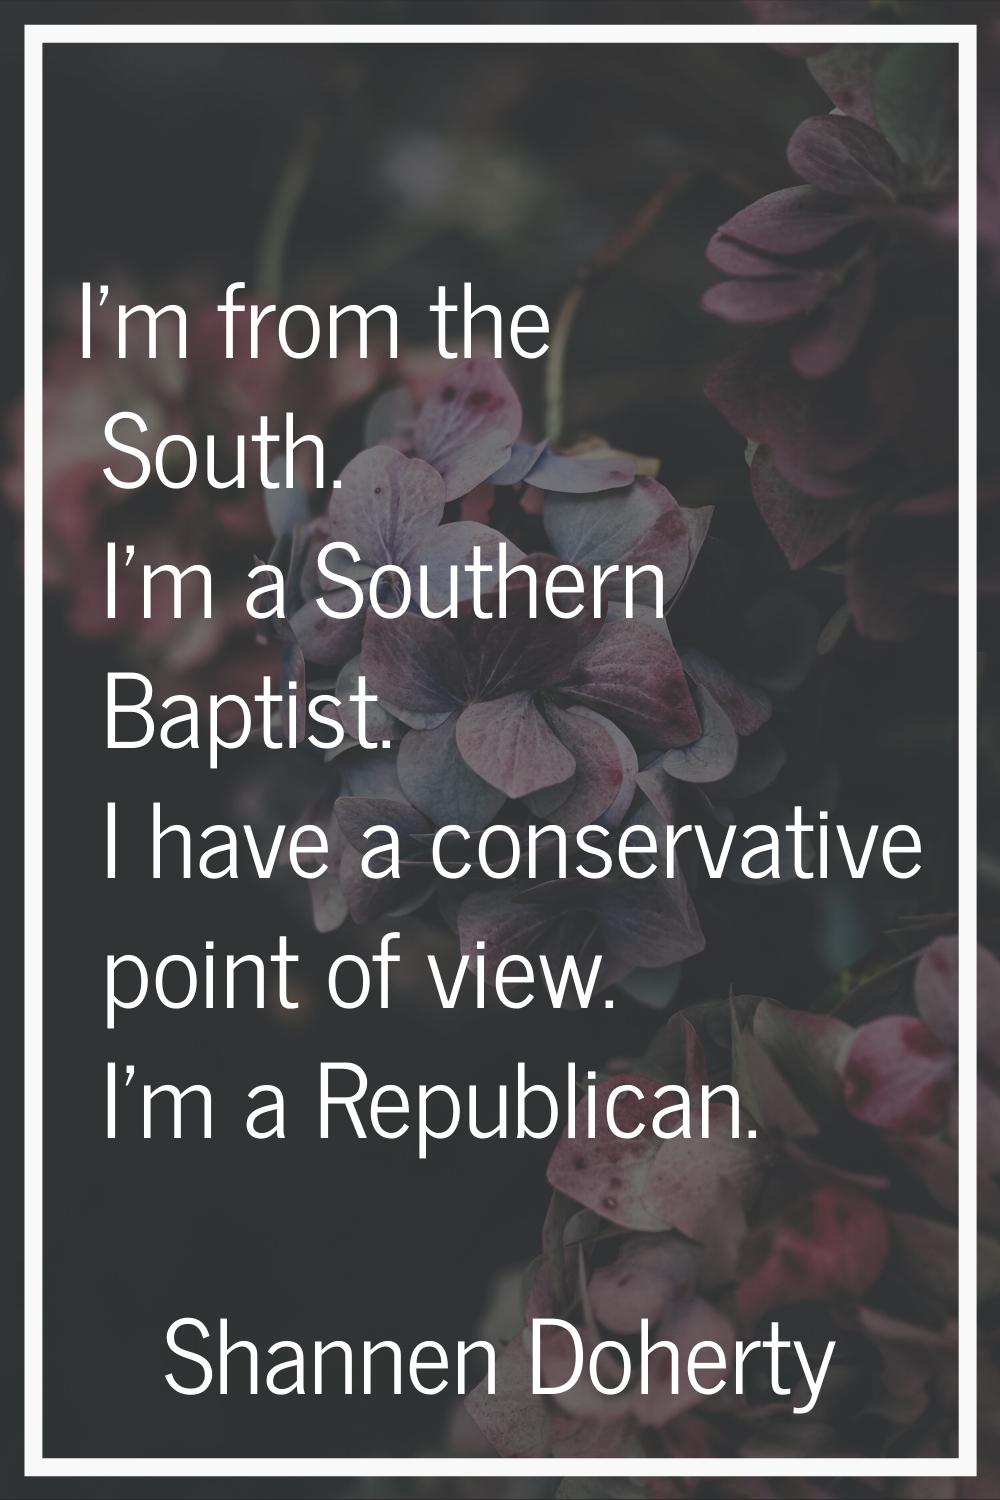 I'm from the South. I'm a Southern Baptist. I have a conservative point of view. I'm a Republican.